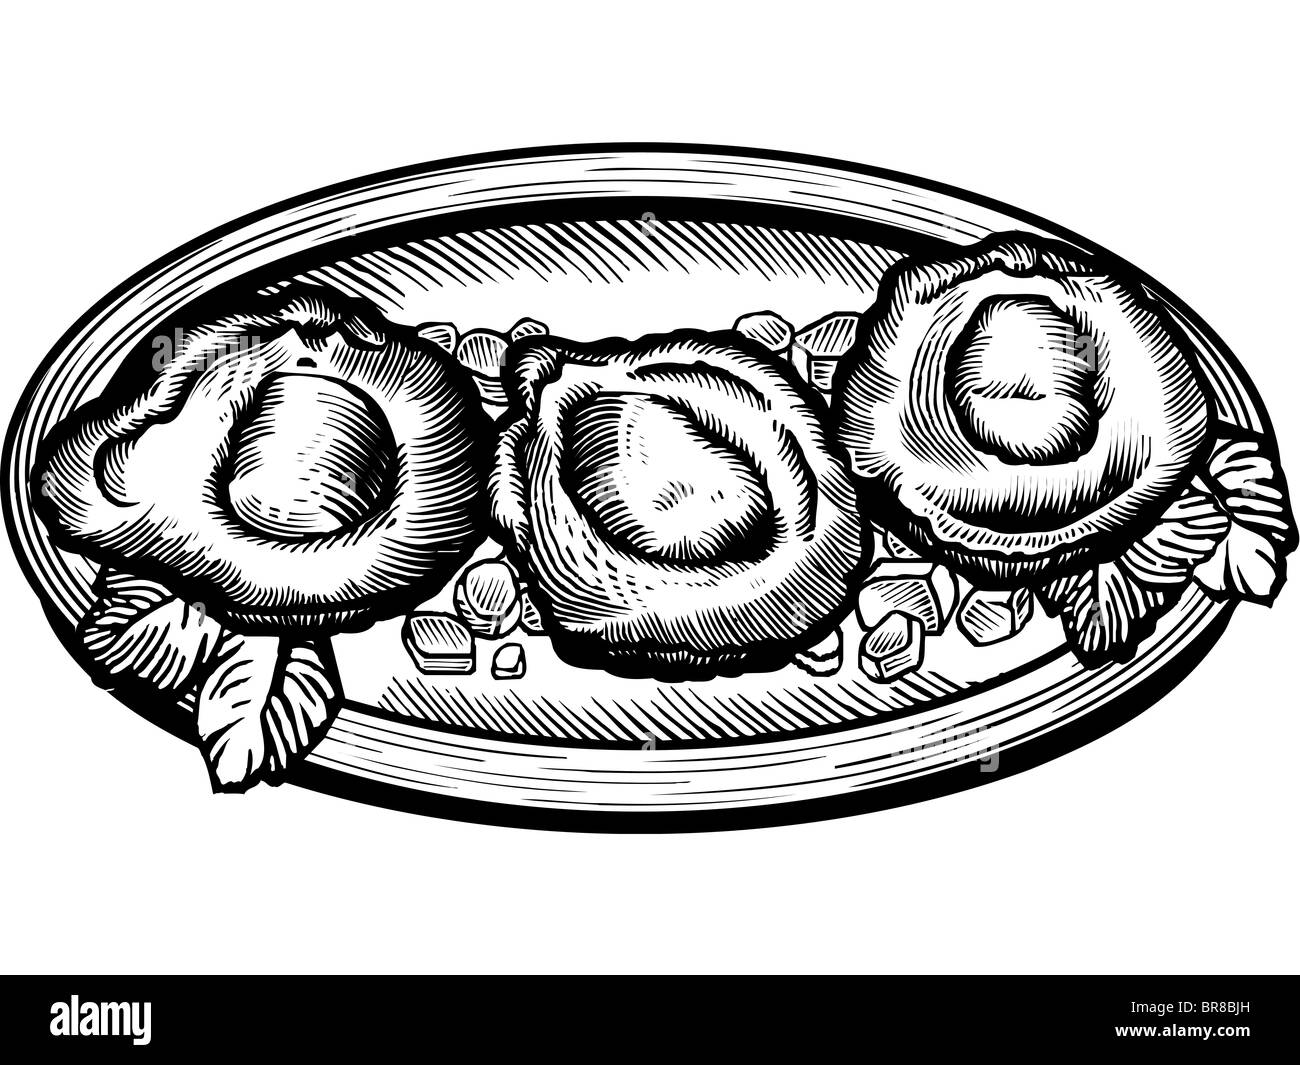 A plate of oysters on the half shell Stock Photo